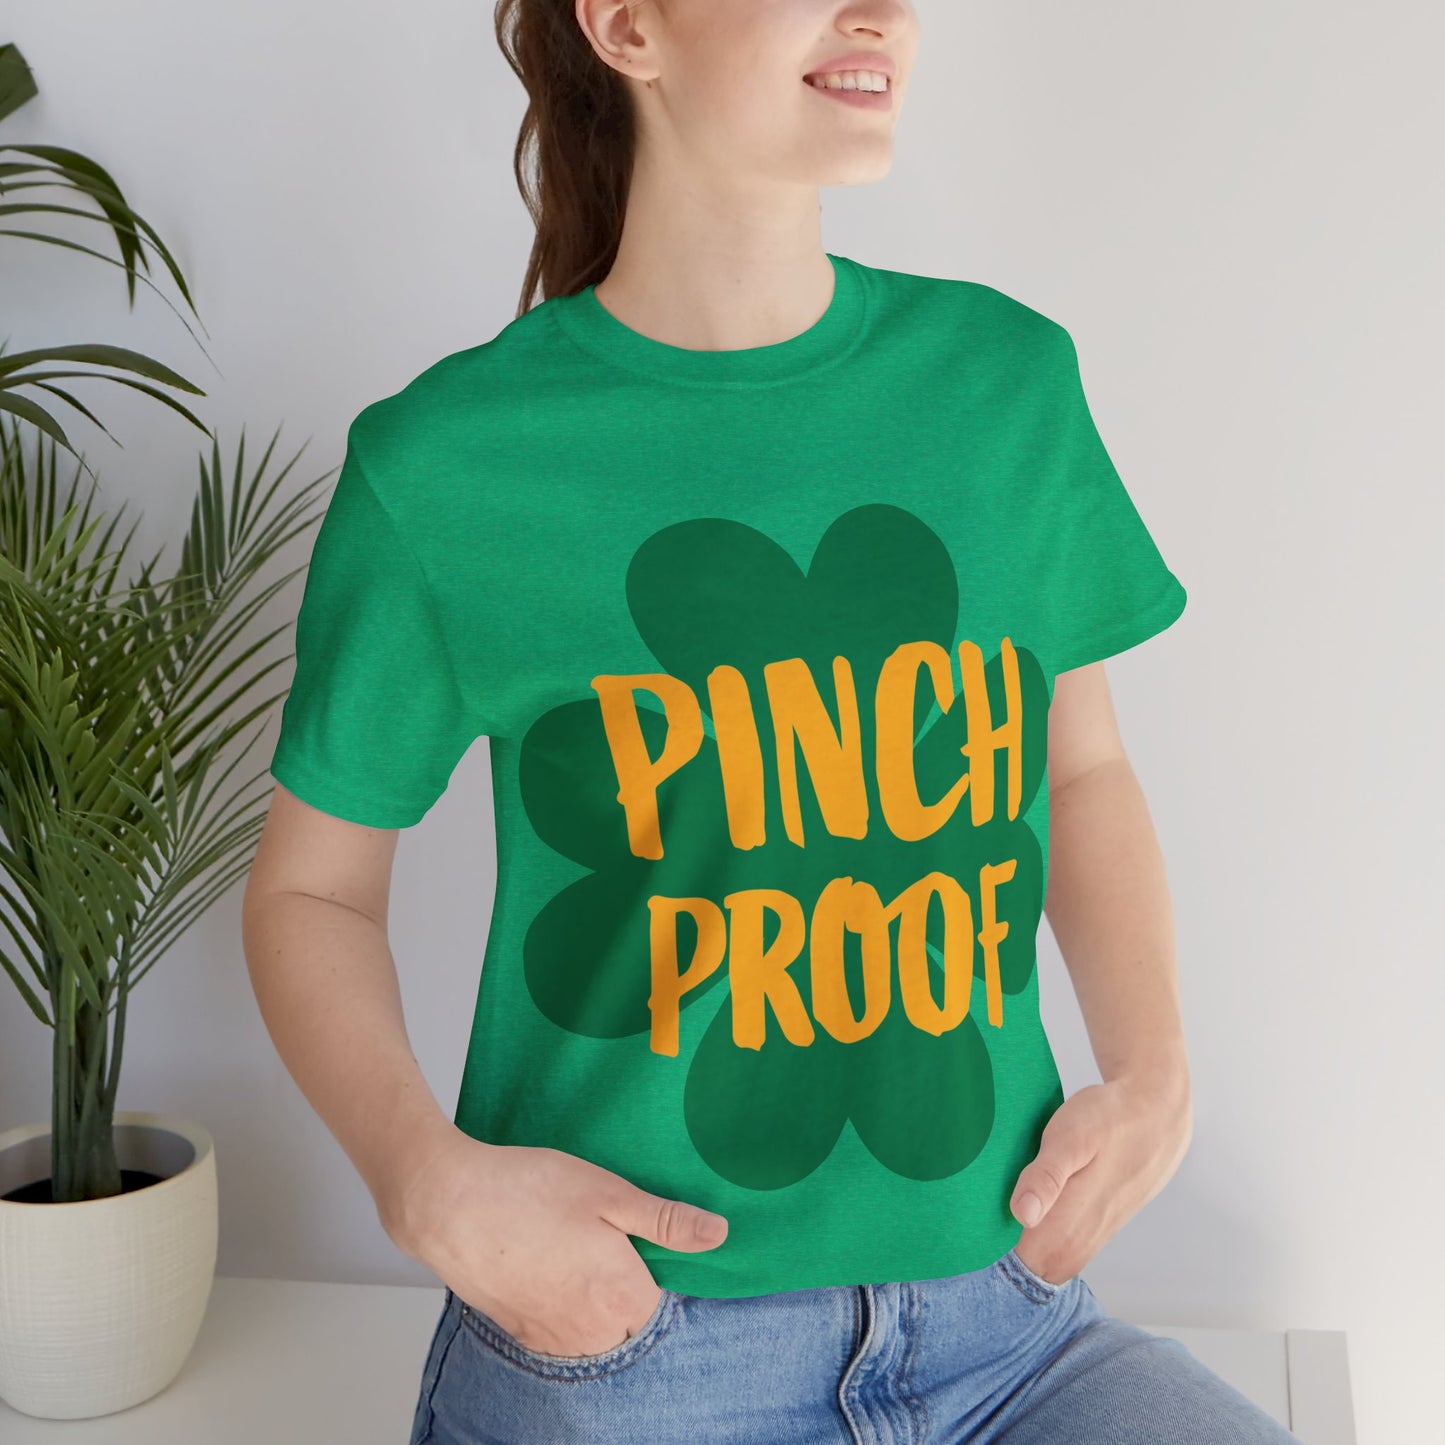 St. Patricks Day "Pinch Proof" T Shirt, Funny St. Patricks Day shirt, St. Pattys Day Funny shirt